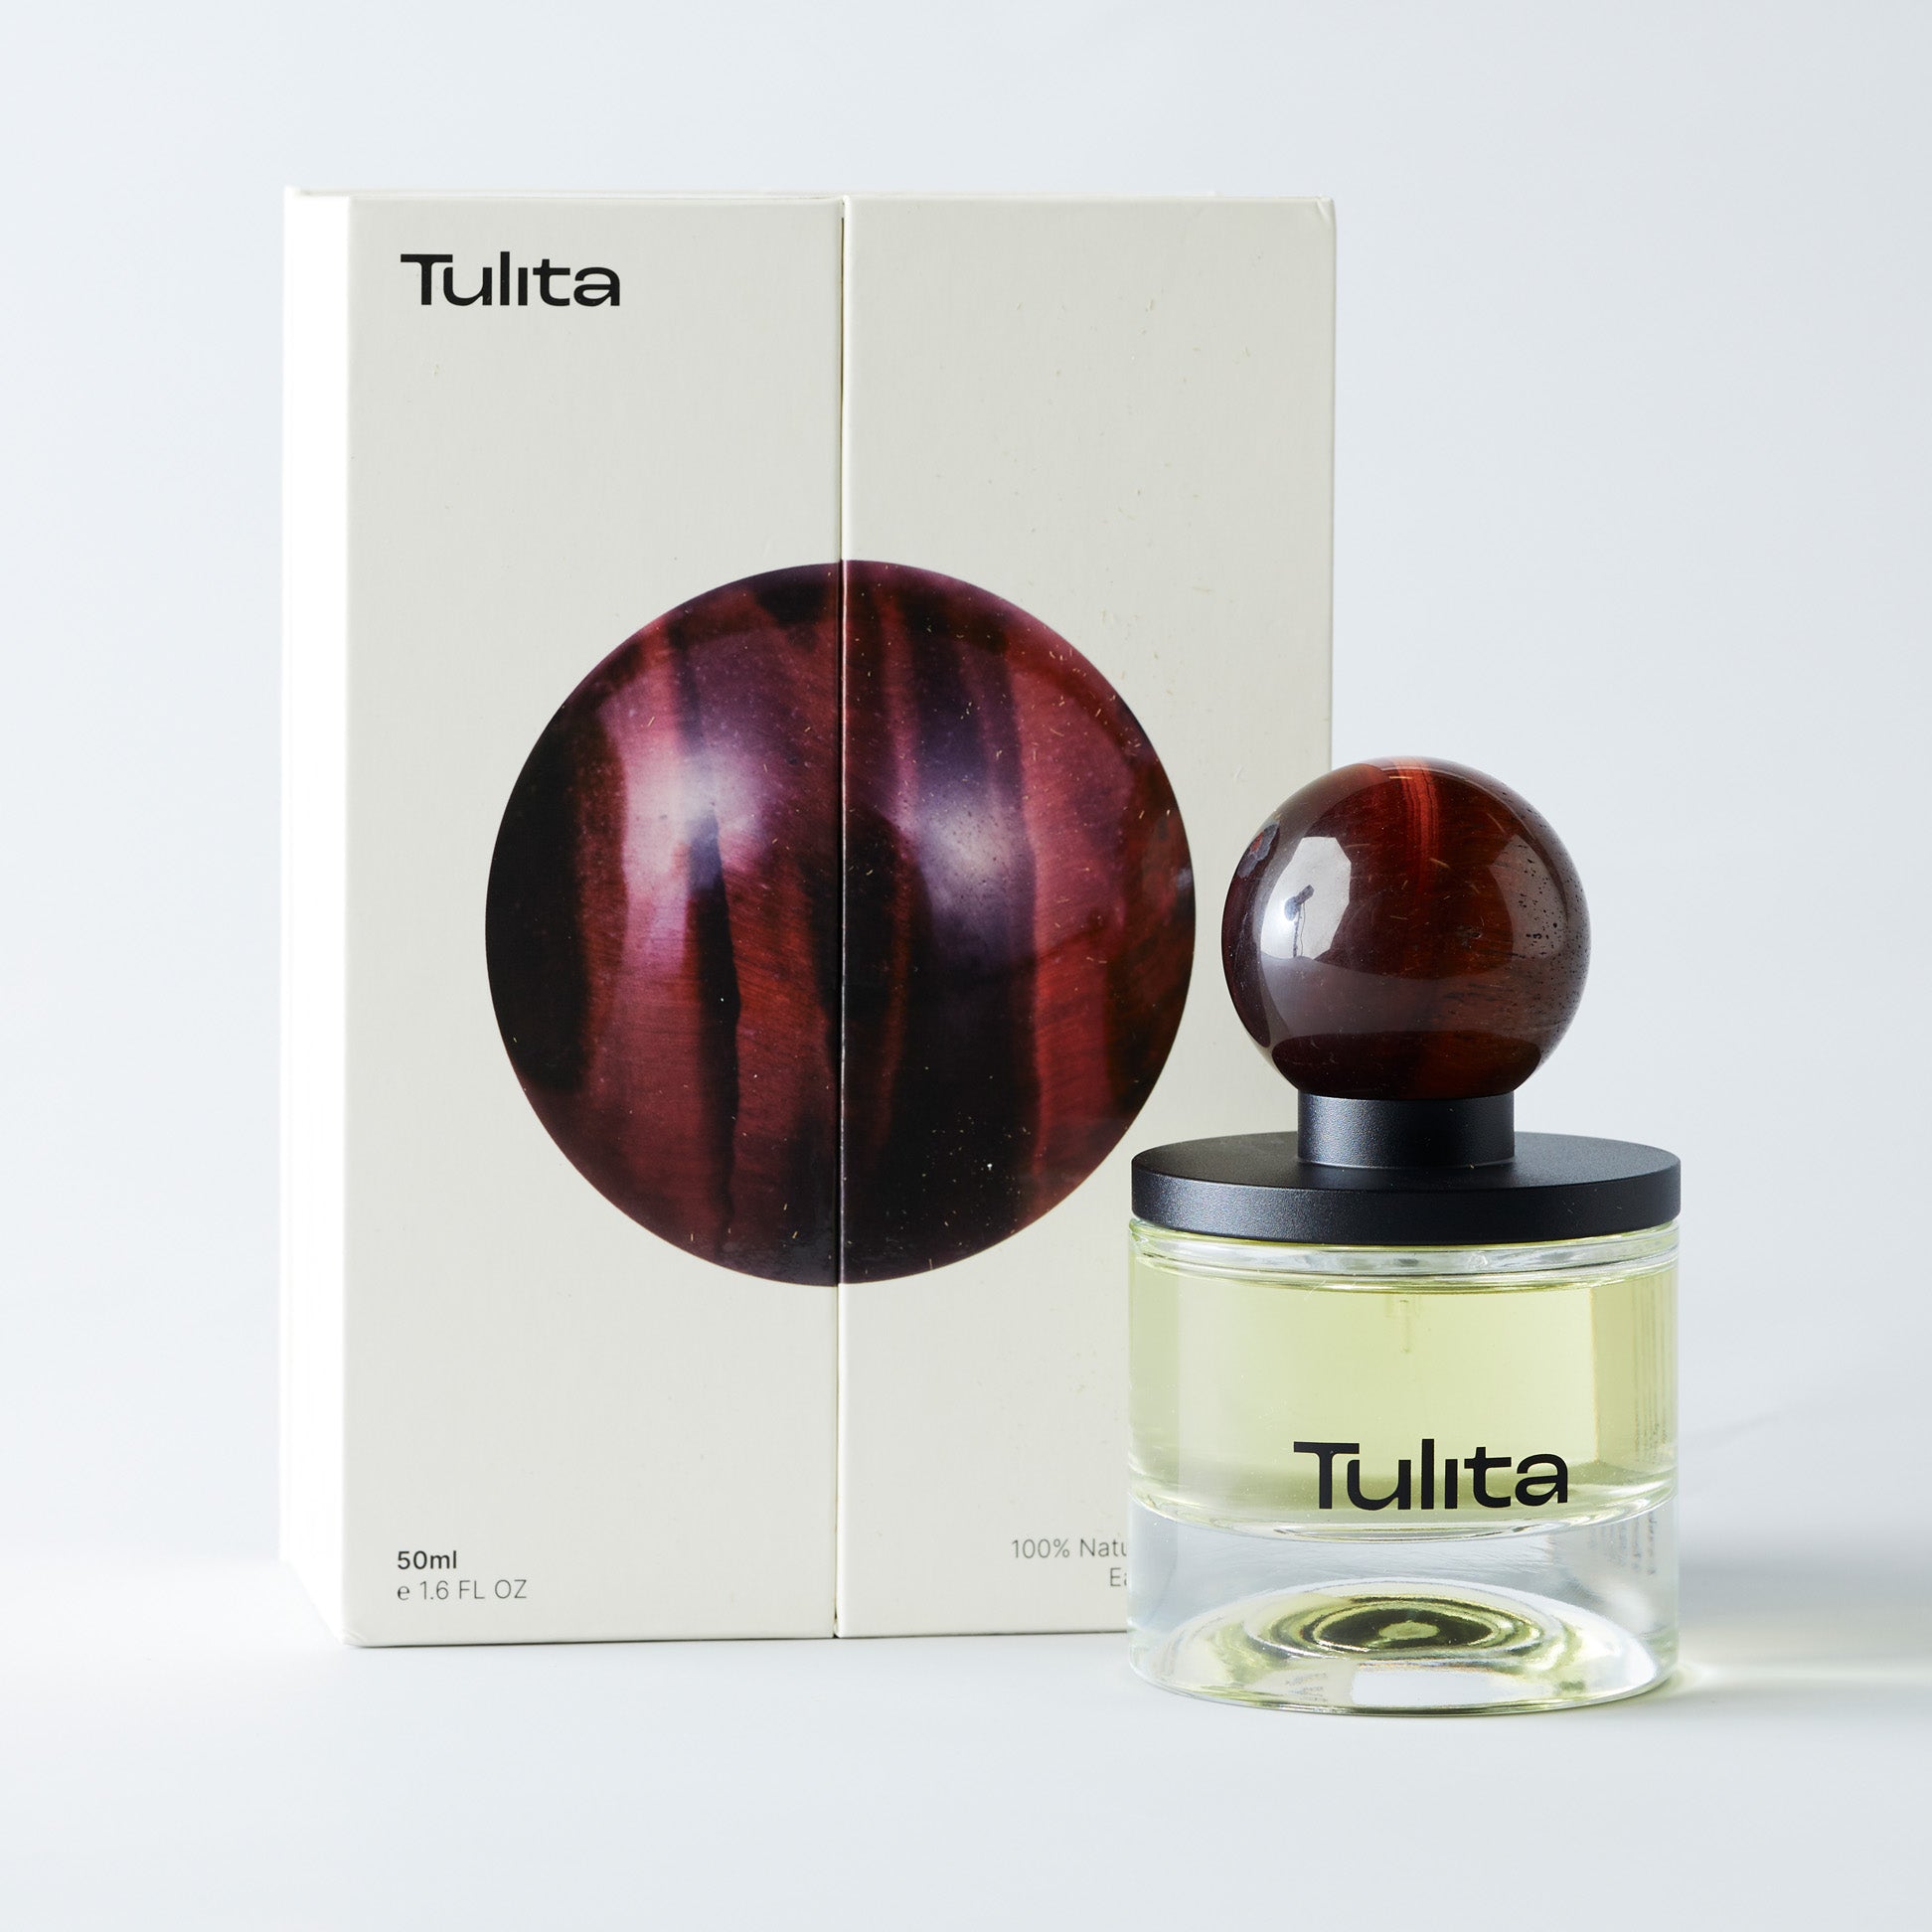 Agati Natural fragrance by Tulita, now available at Sensoriam